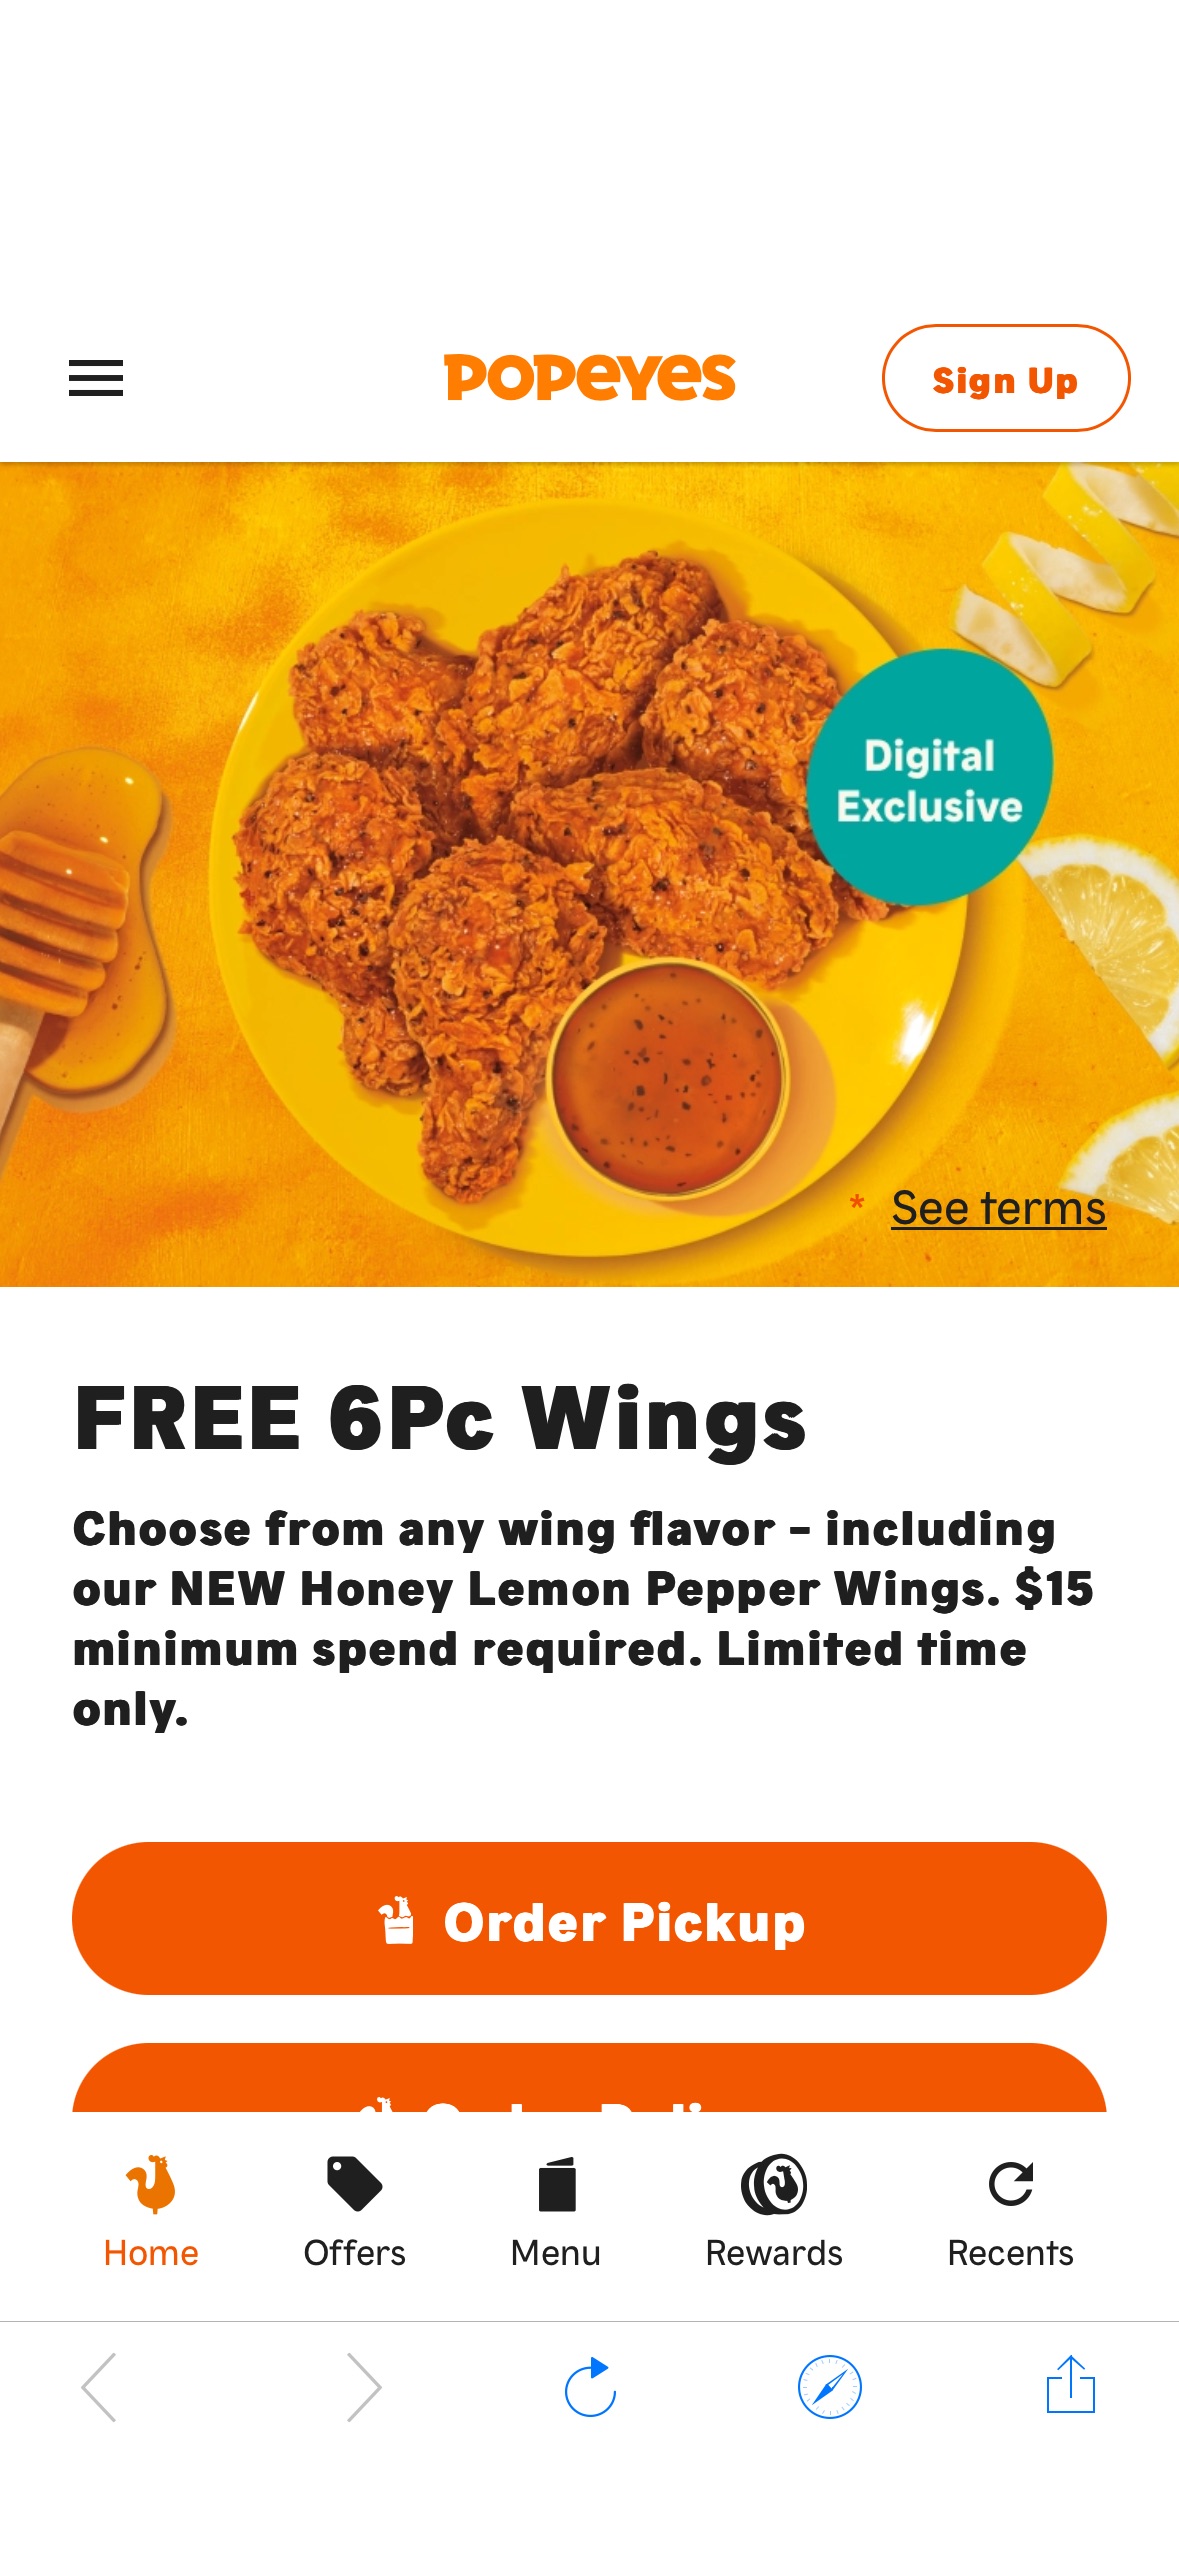 FREE 6Pc Wings
Choose from any wing flavor - including our NEW Honey Lemon Pepper Wings. $15 minimum spend required. Limited time only.